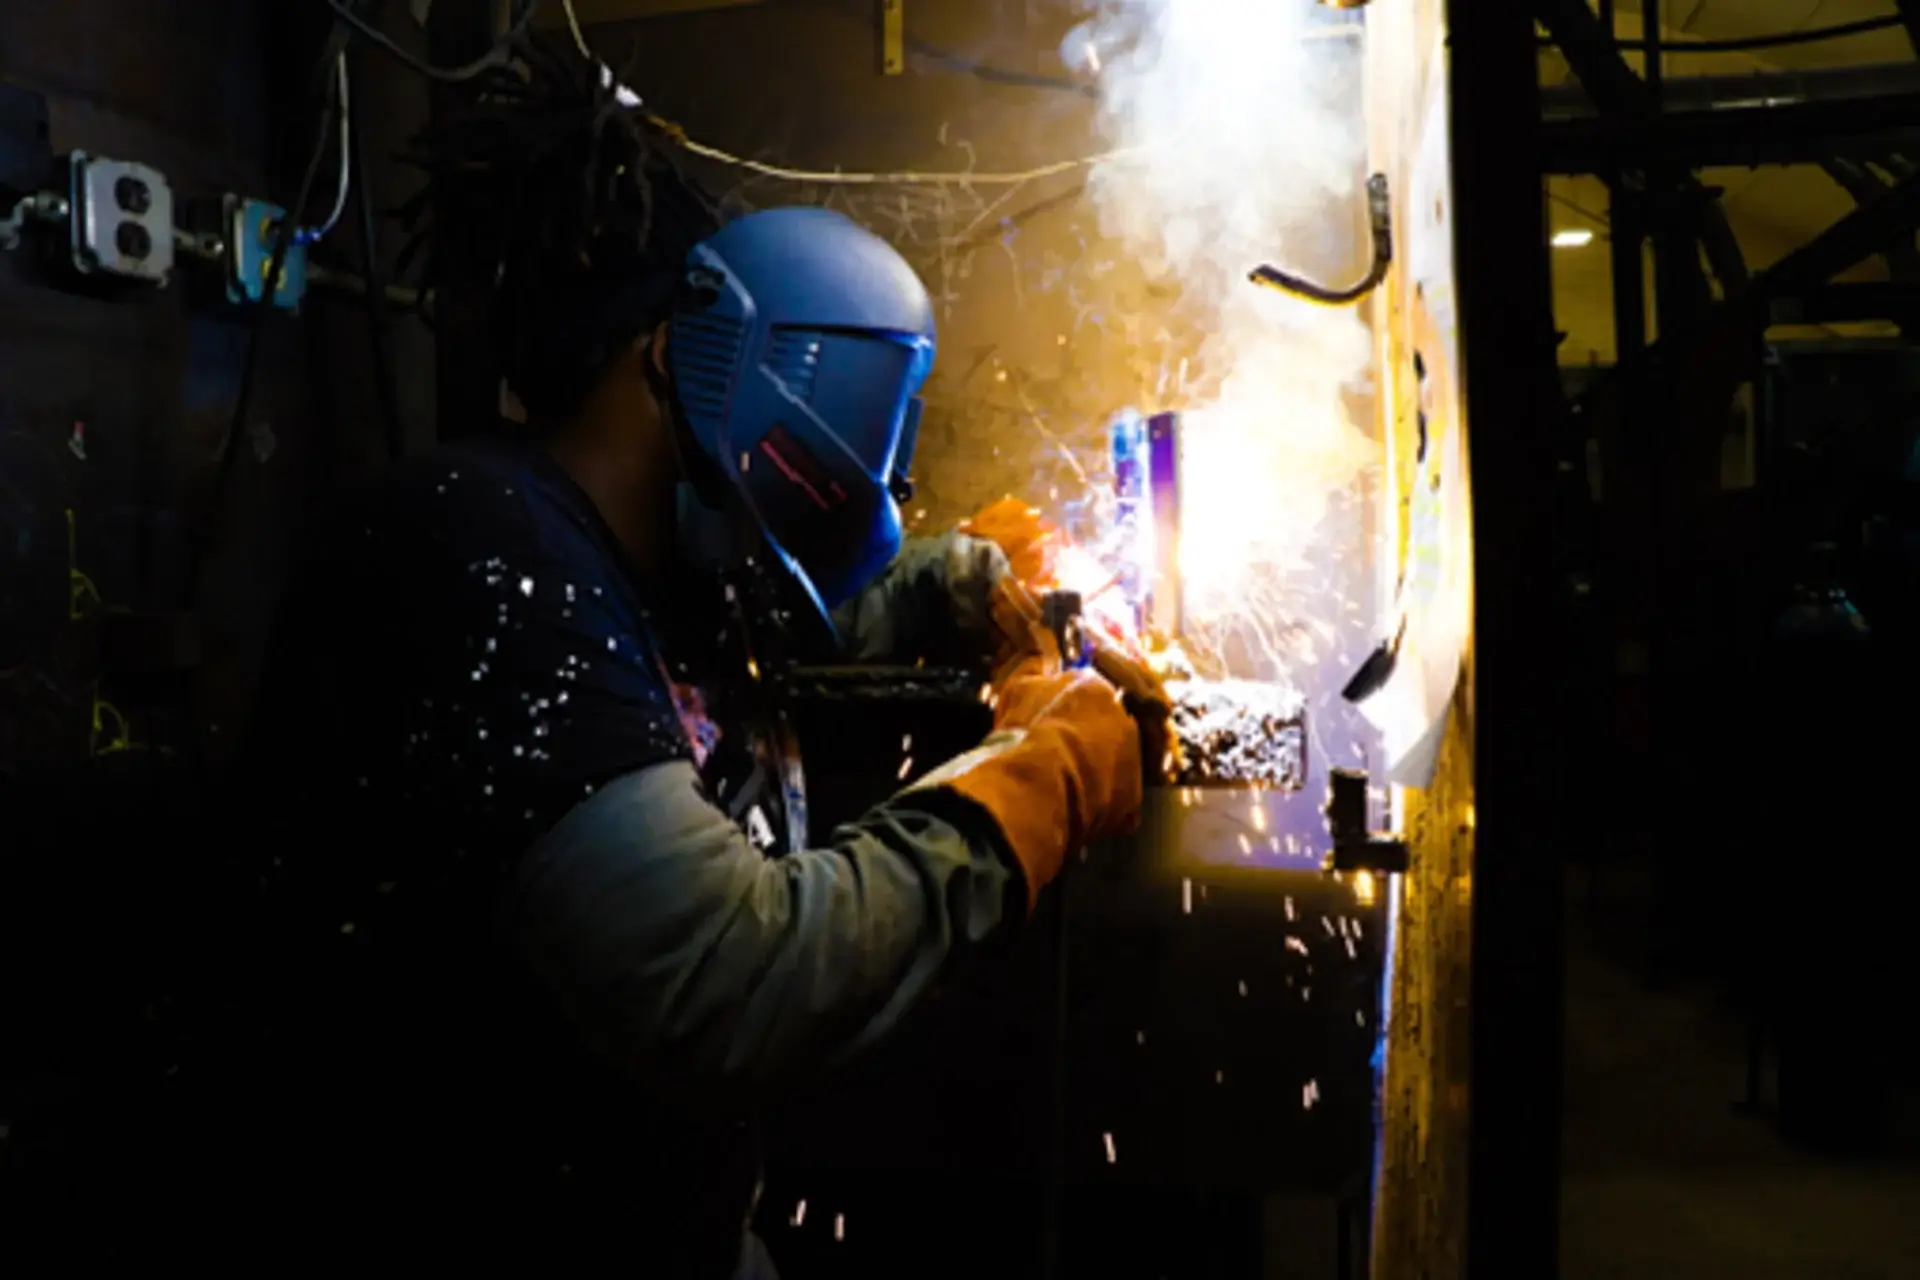 Welding Career: Learning GMAW Welding For Auto Repair